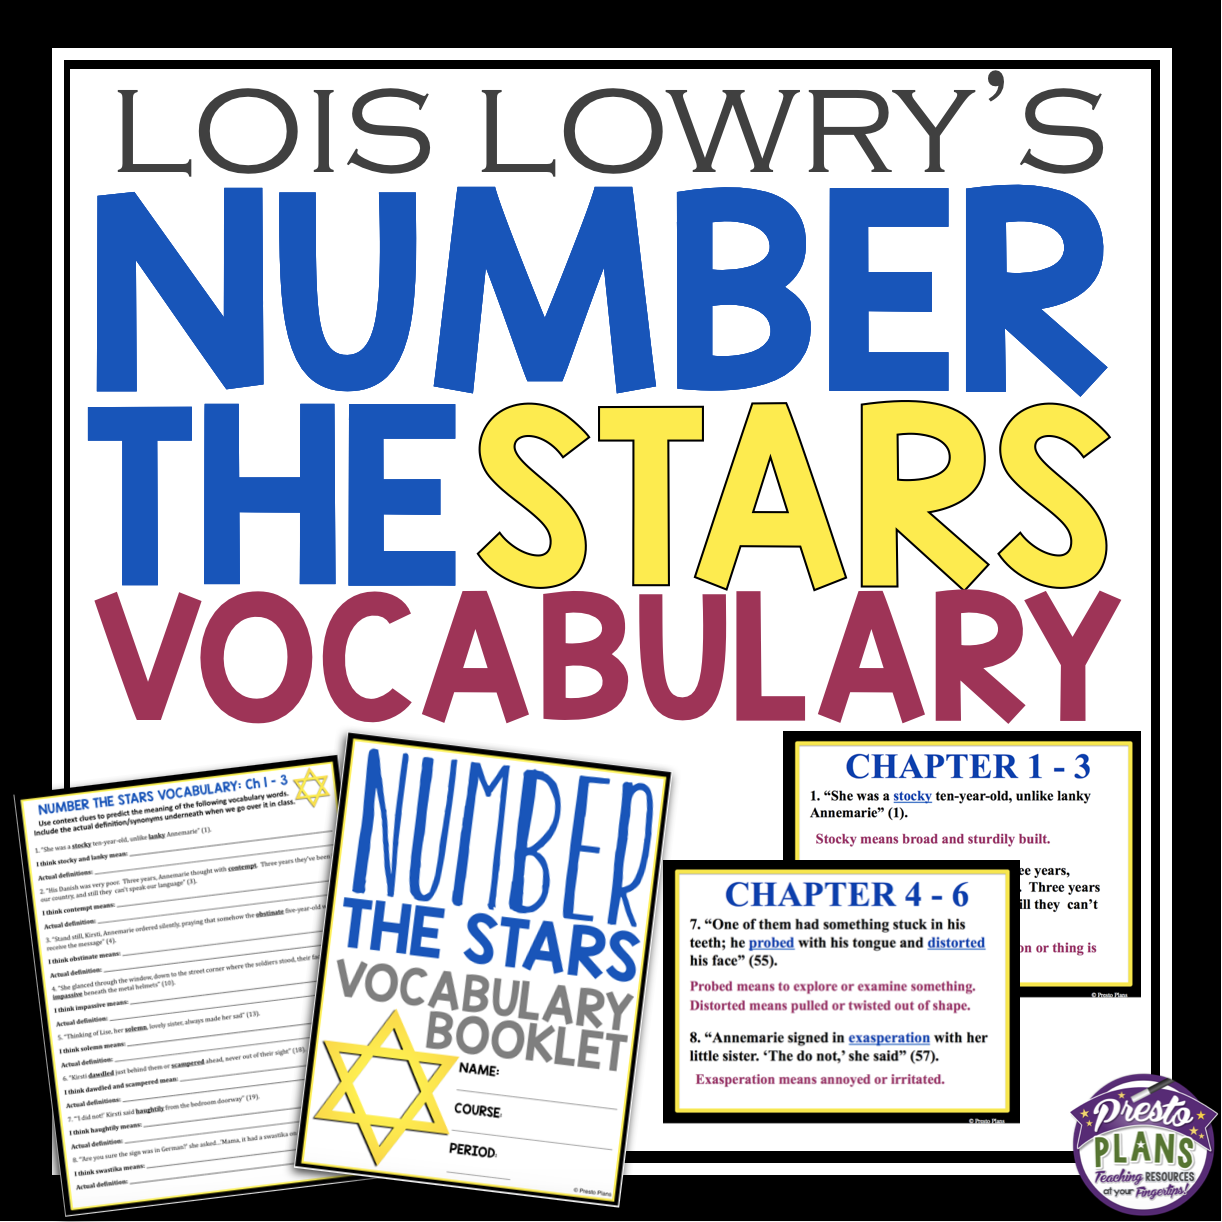 number-the-stars-vocabulary-prestoplanners